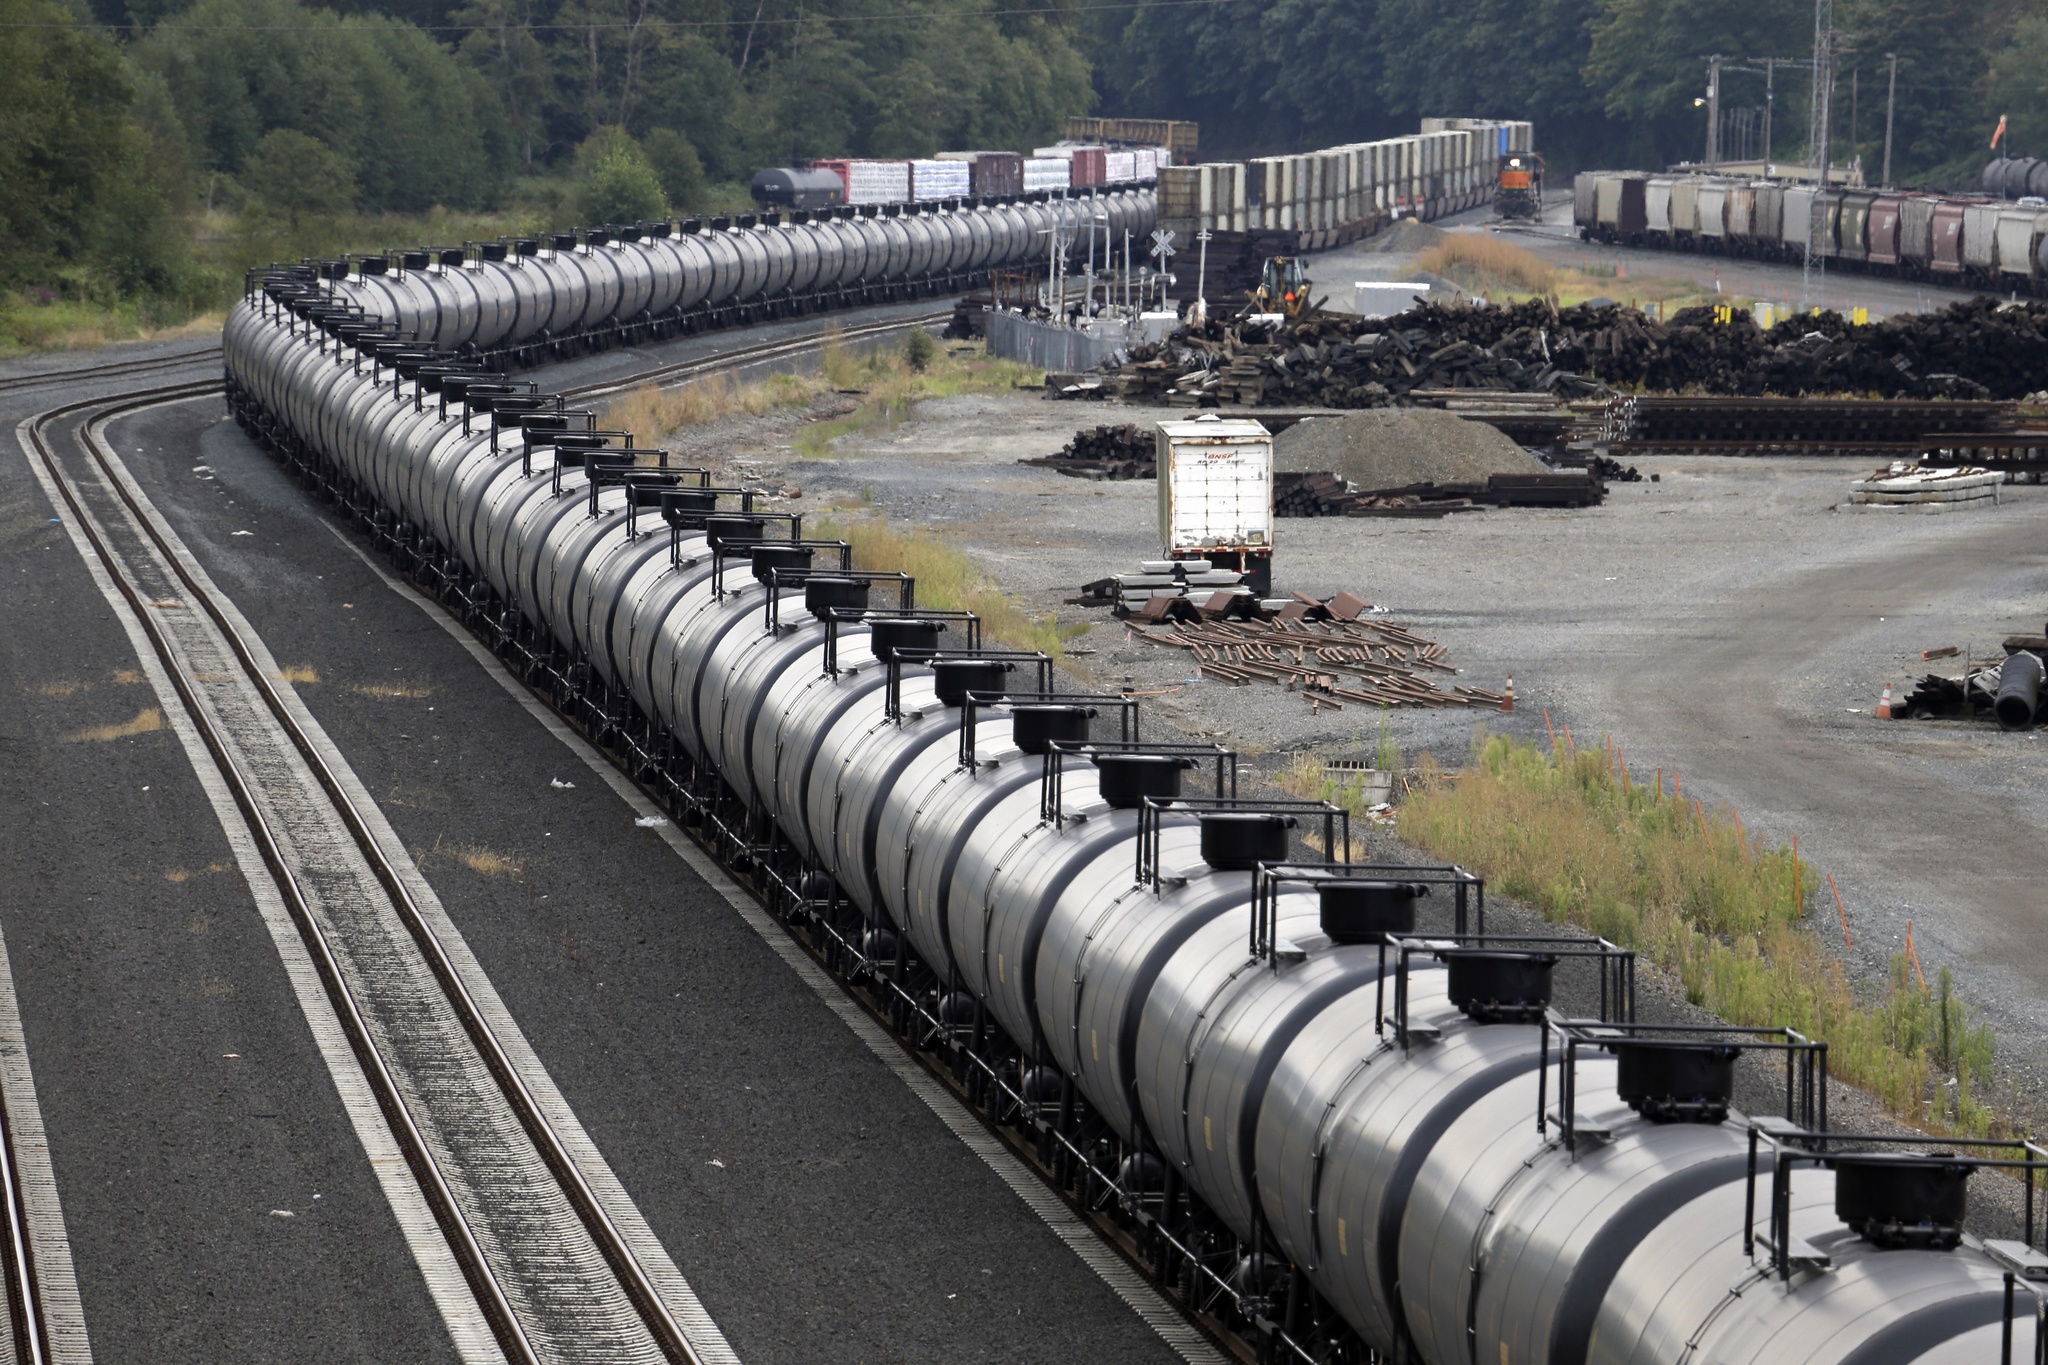 Bills aim to beef up oil transportation safety